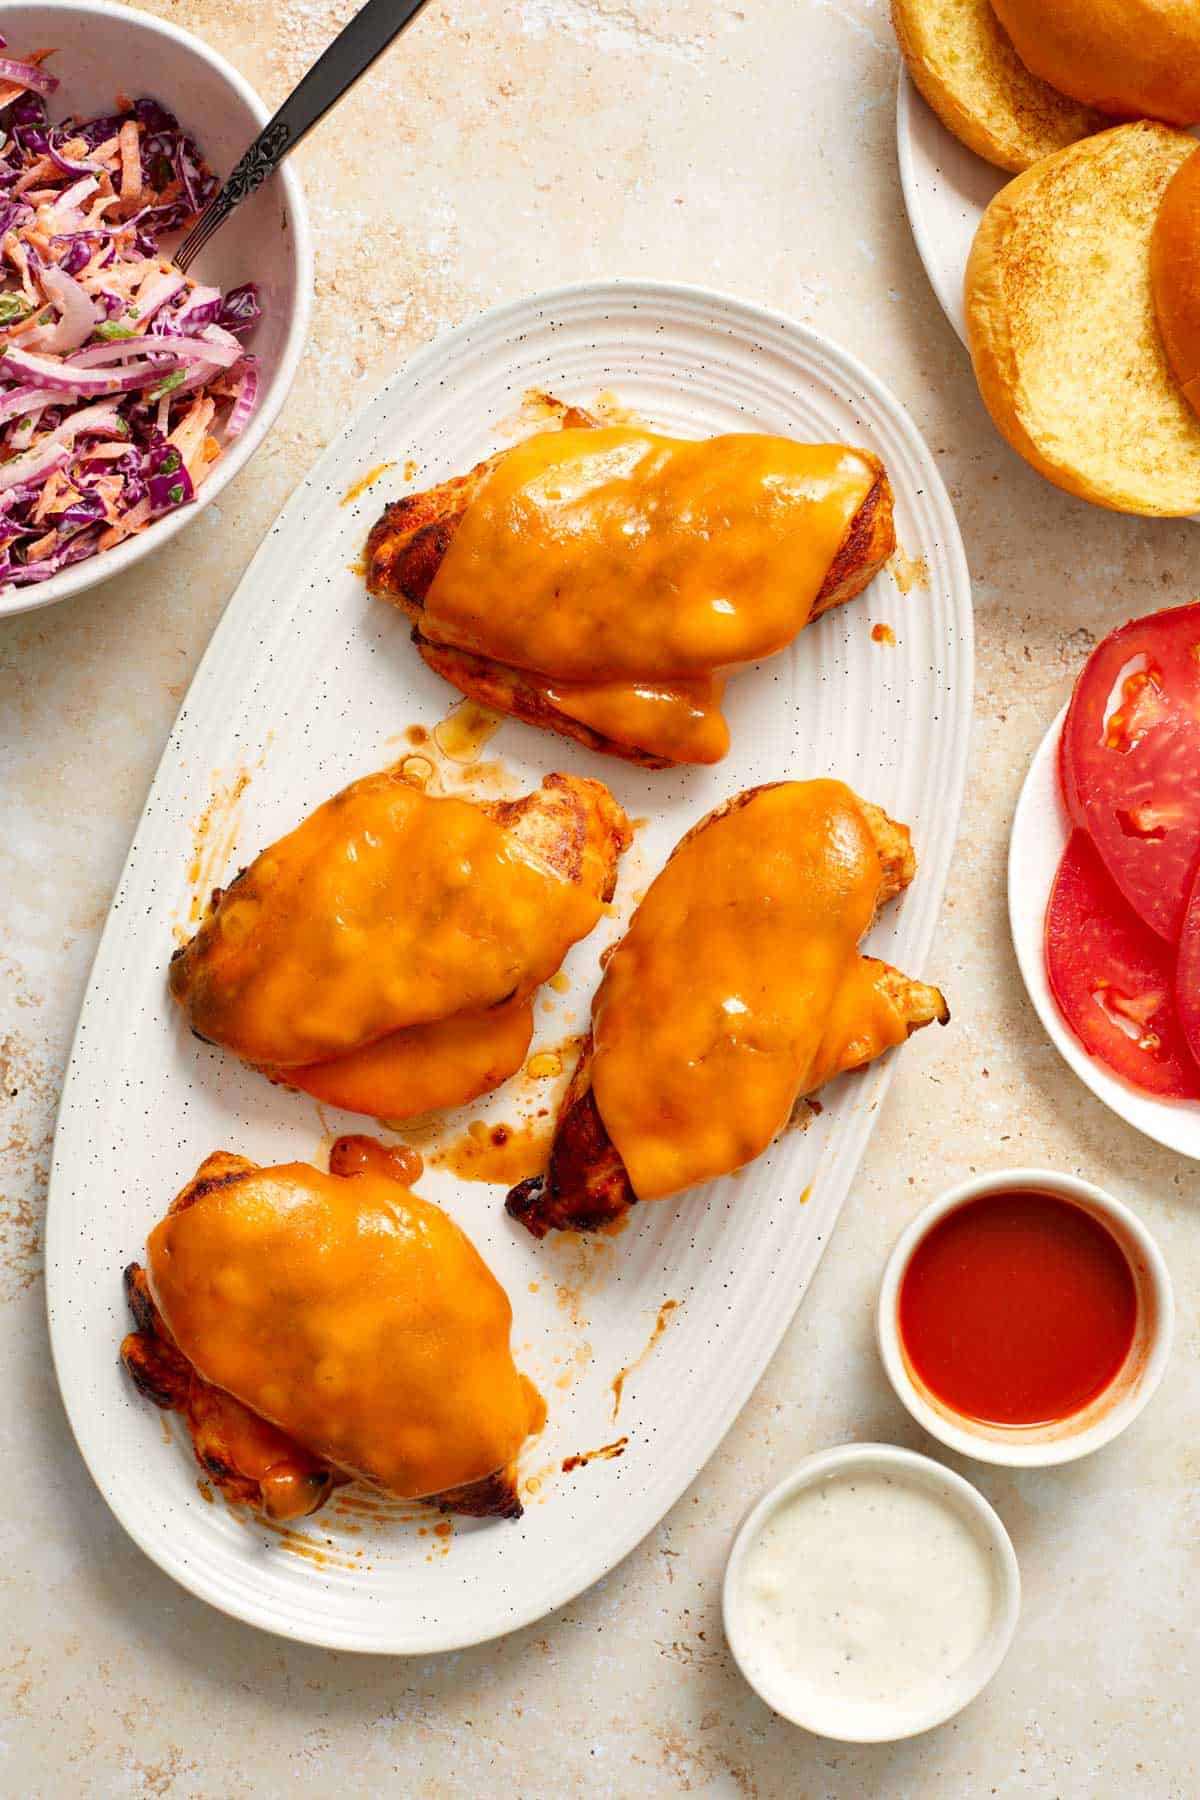 Overhead view of a platter of grilled buffalo chicken with melted cheese on top.